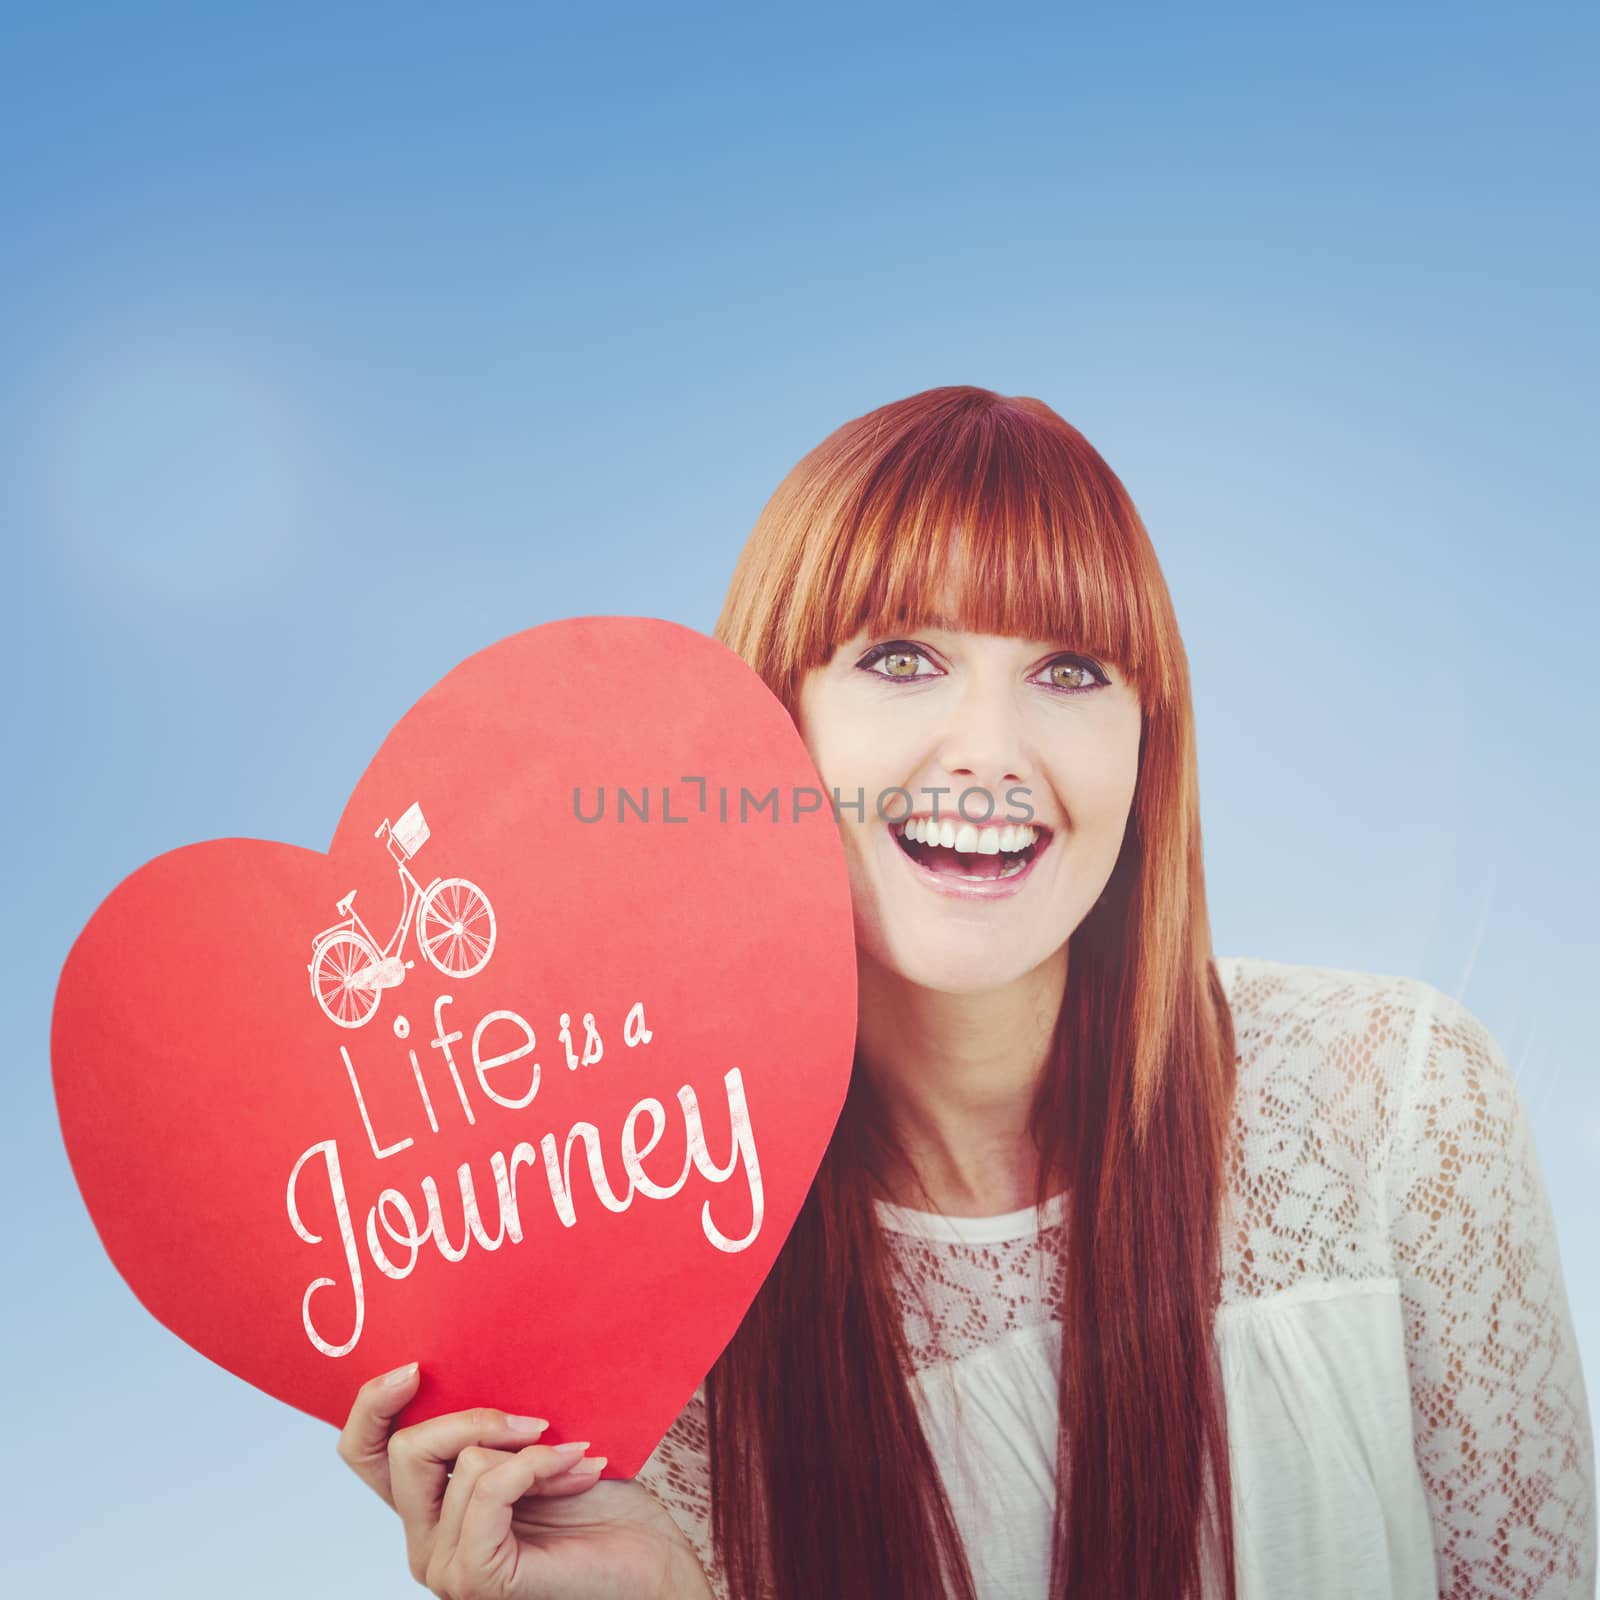 Smiling hipster woman with a big red heart against blue sky